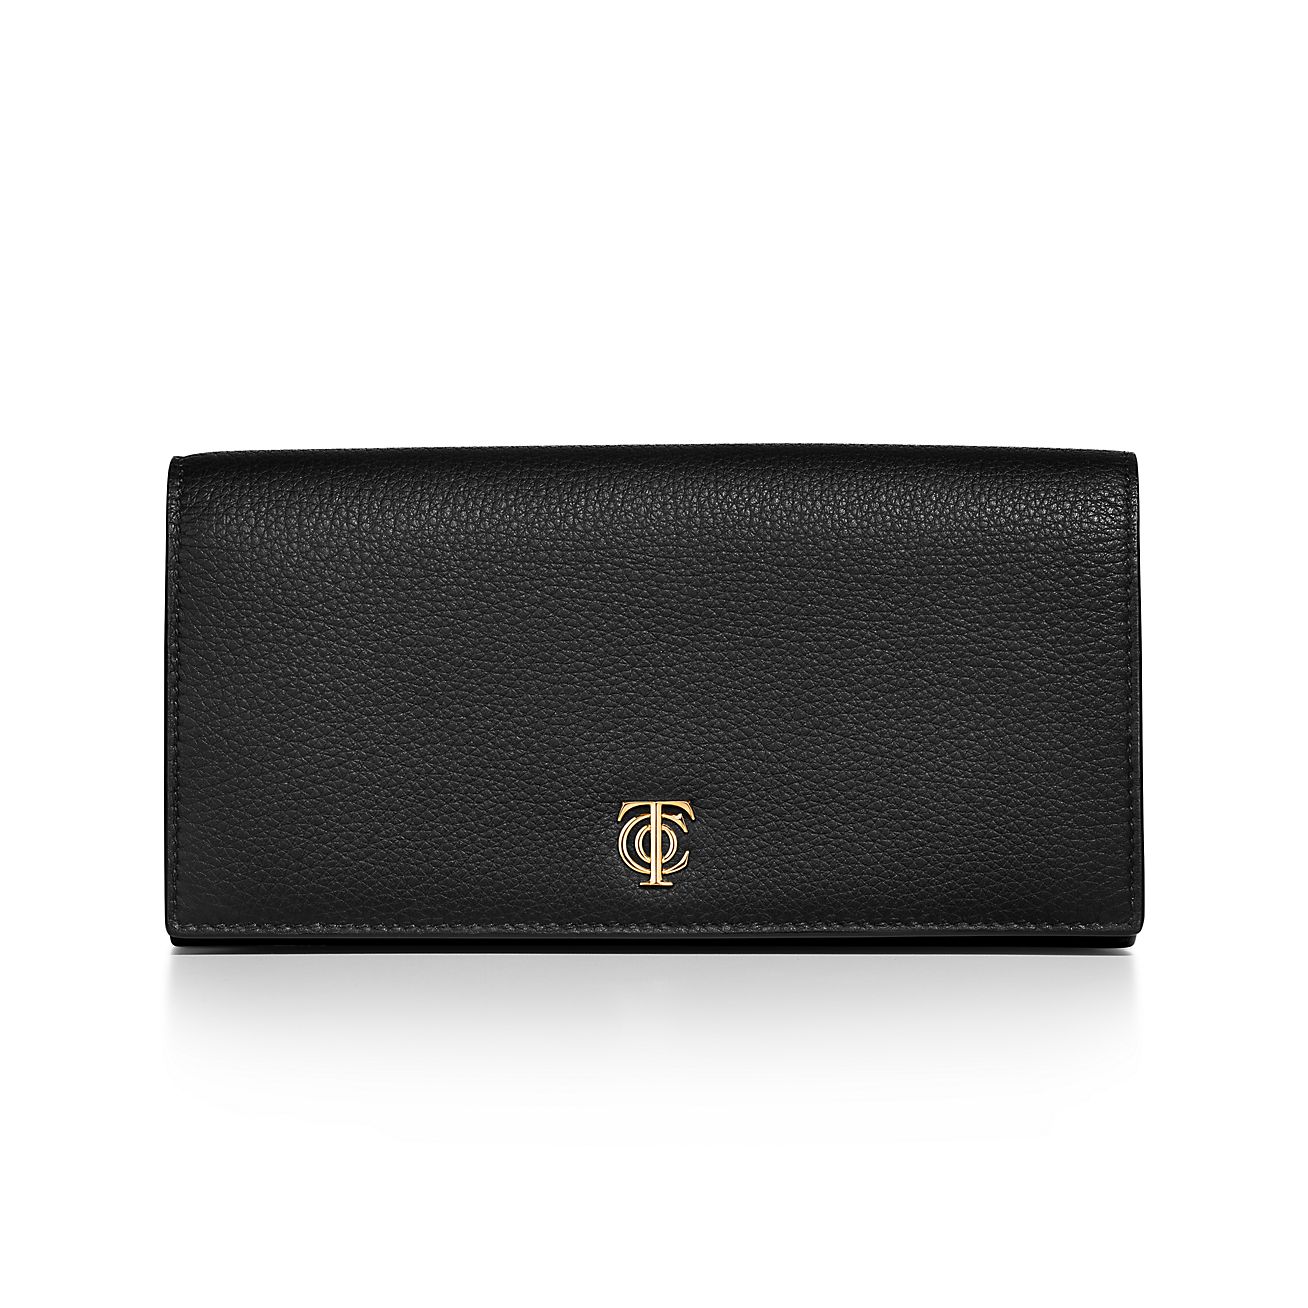 T&co. Flap Continental Wallet in Black Leather